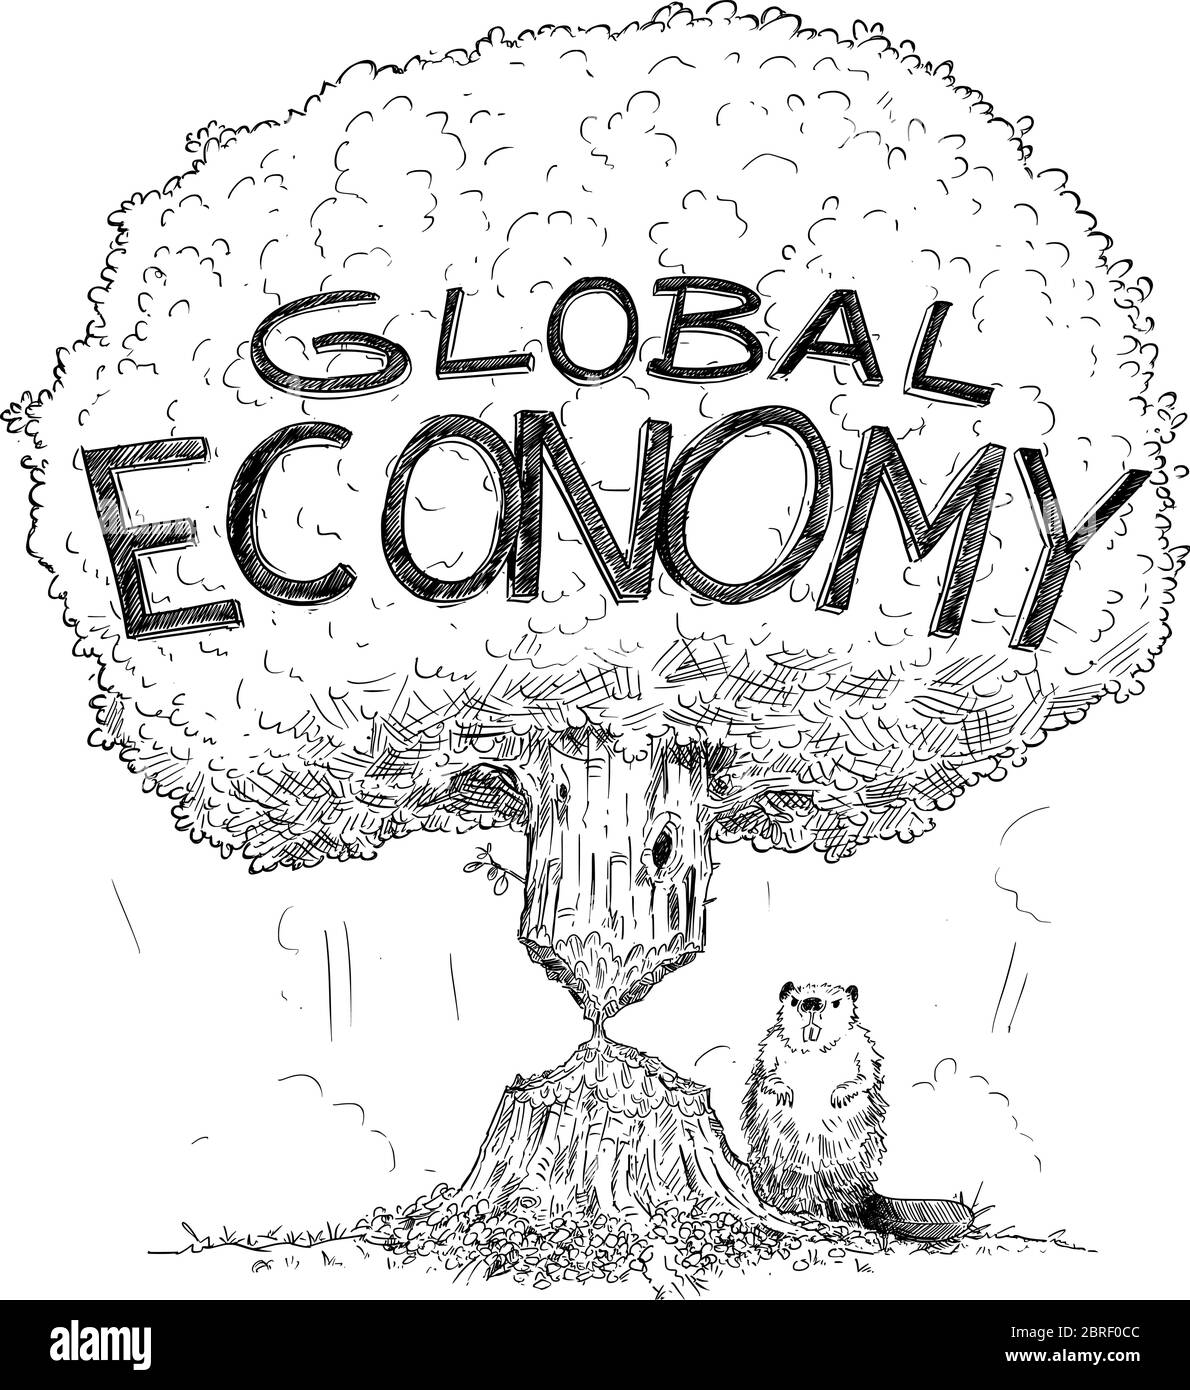 Vector cartoon drawing conceptual illustration of tree representing Global economy weakened by crisis as beaver. Concept of financial crisis, debt or coronavirus in world. Stock Vector